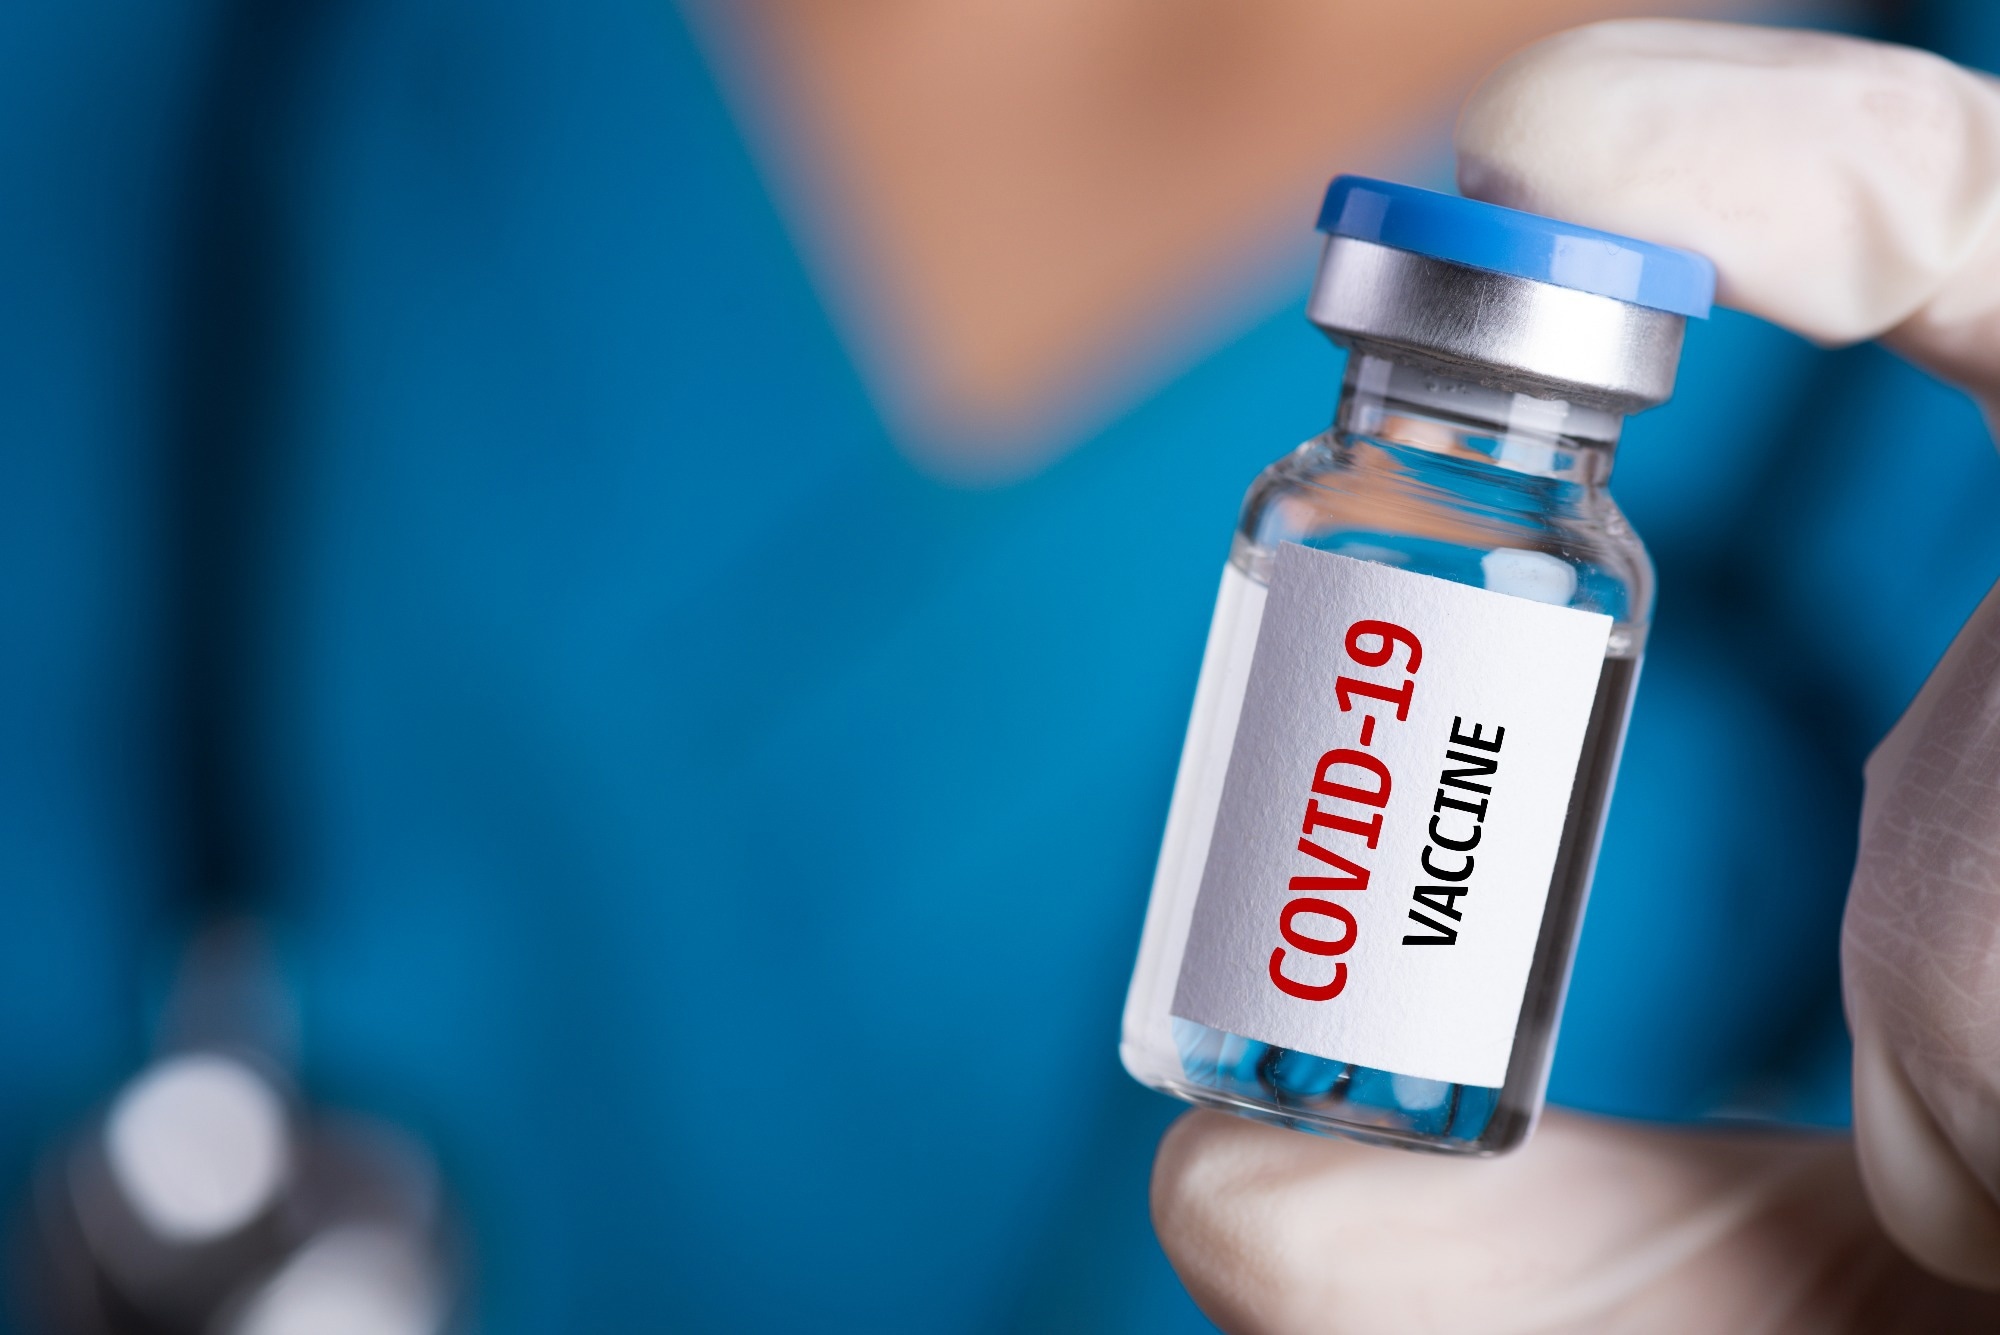 Study: Efficacy of first dose of covid-19 vaccine versus no vaccination on symptoms of patients with long covid: target trial emulation based on ComPaRe e-cohort. Image Credit: siam.pukkato/Shutterstock